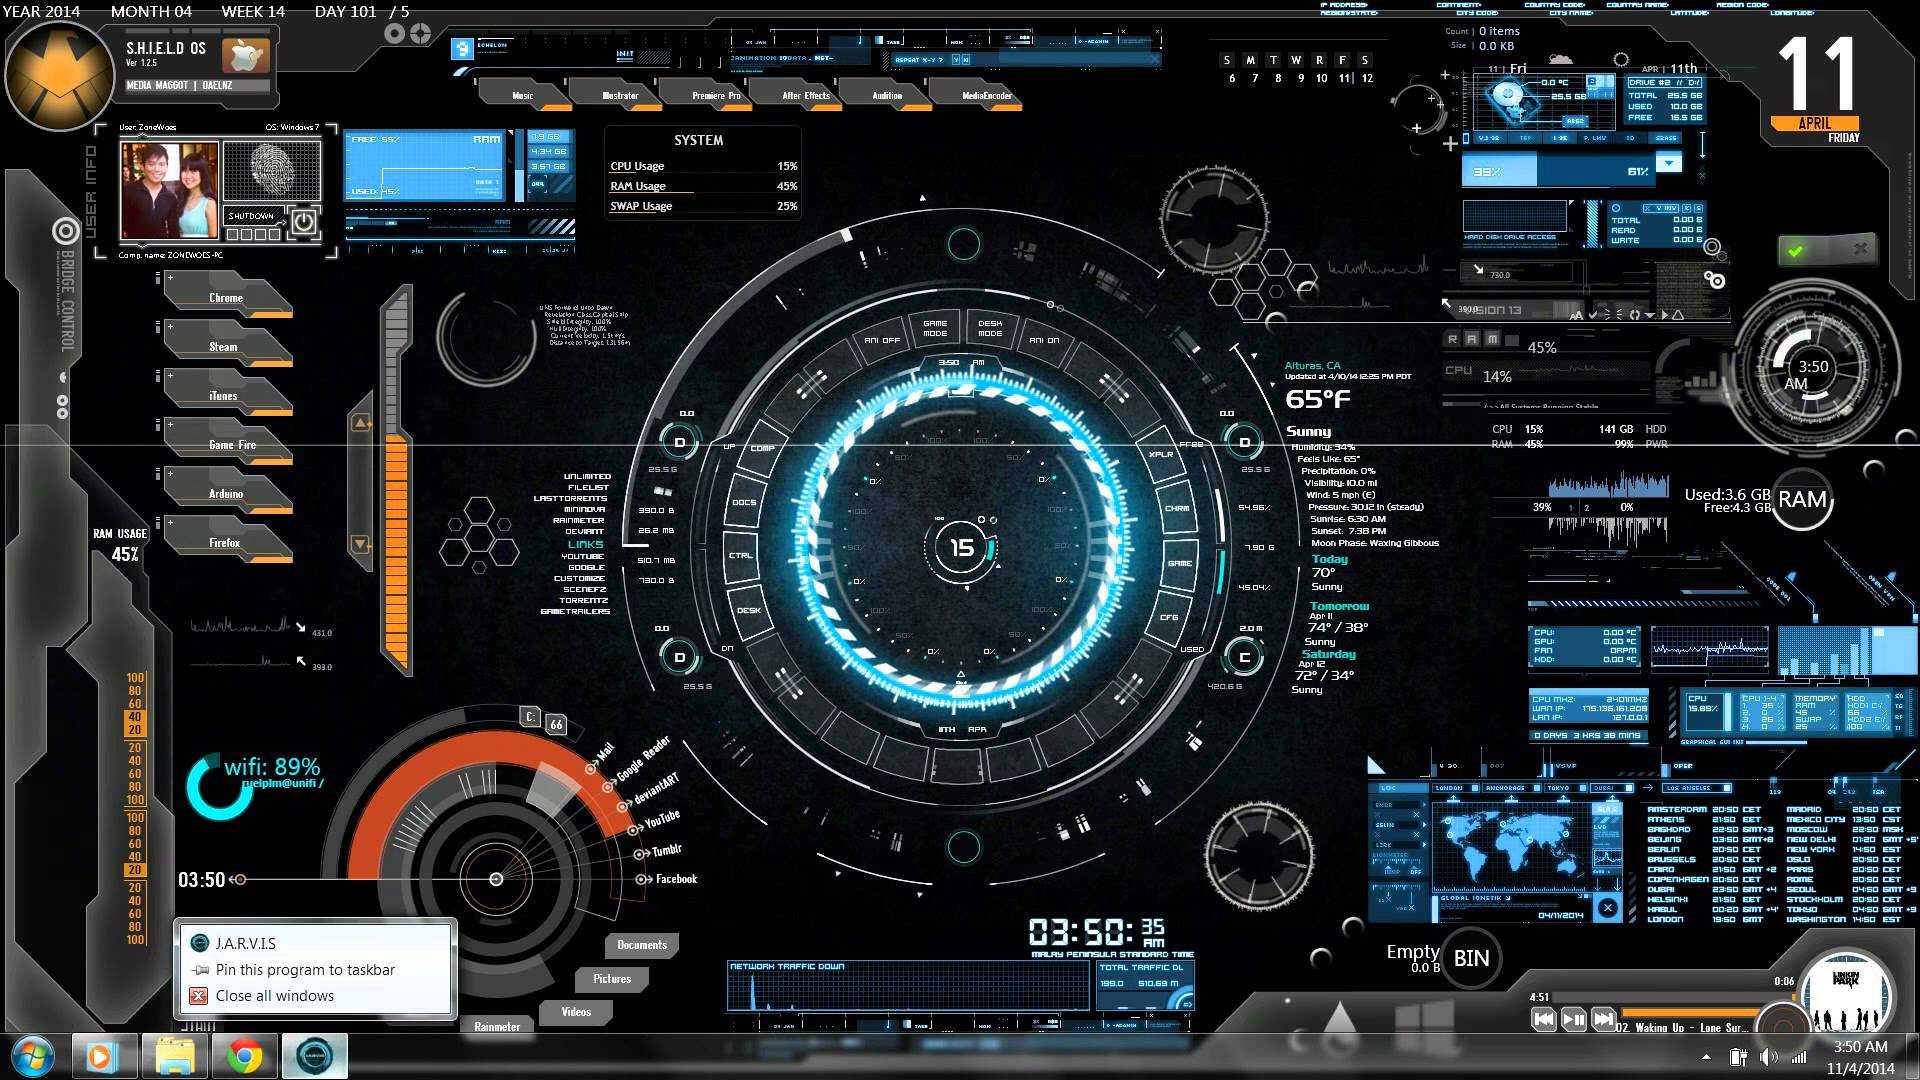 15 best rainmeter skins for windows pc in 2021 [ most used ]